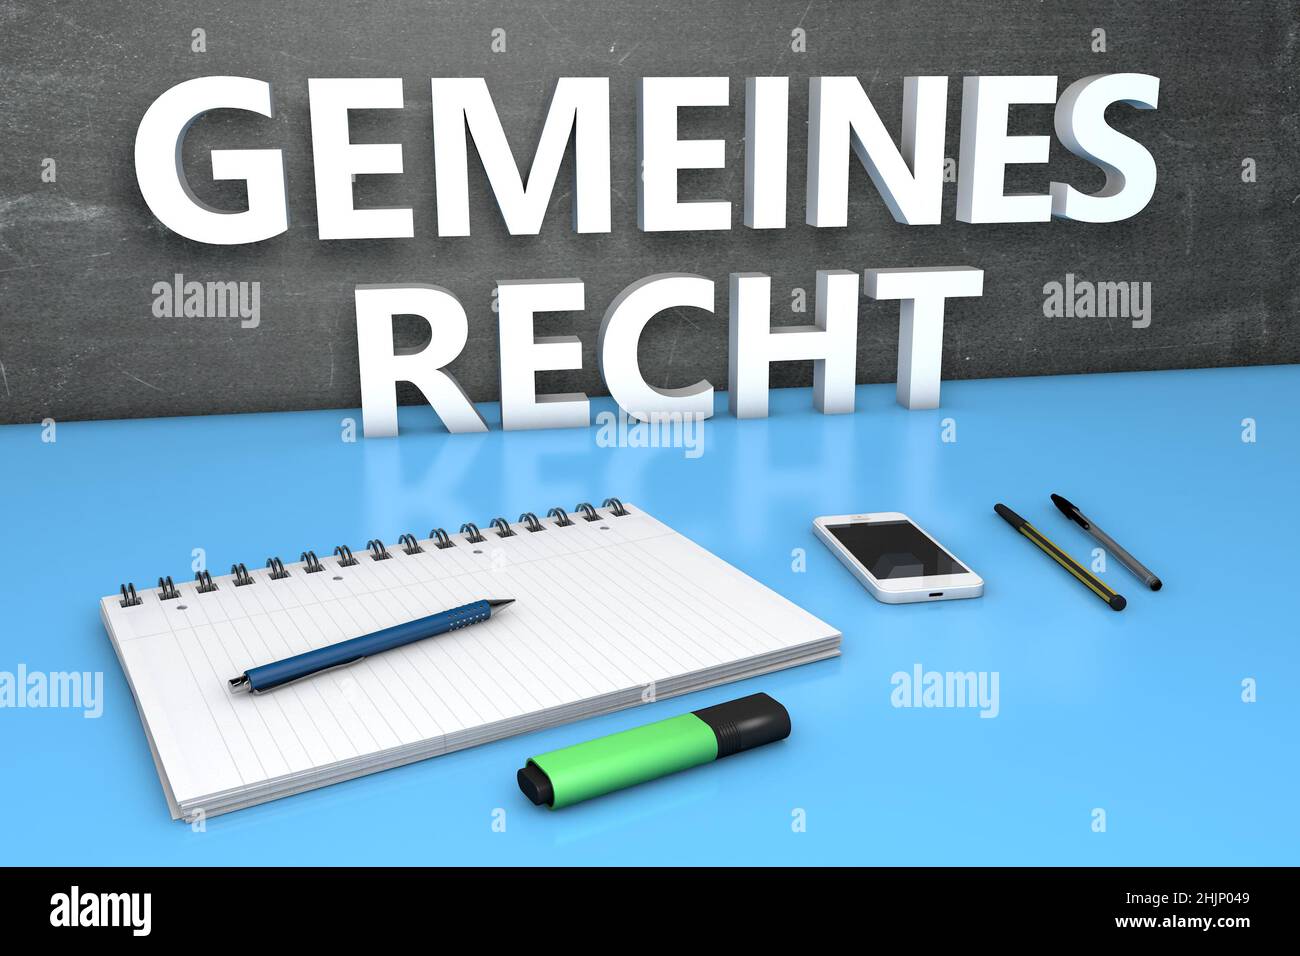 Gemeines Recht - german word for common right - text concept with chalkboard, notebook, pens and mobile phone. 3D render illustration. Stock Photo